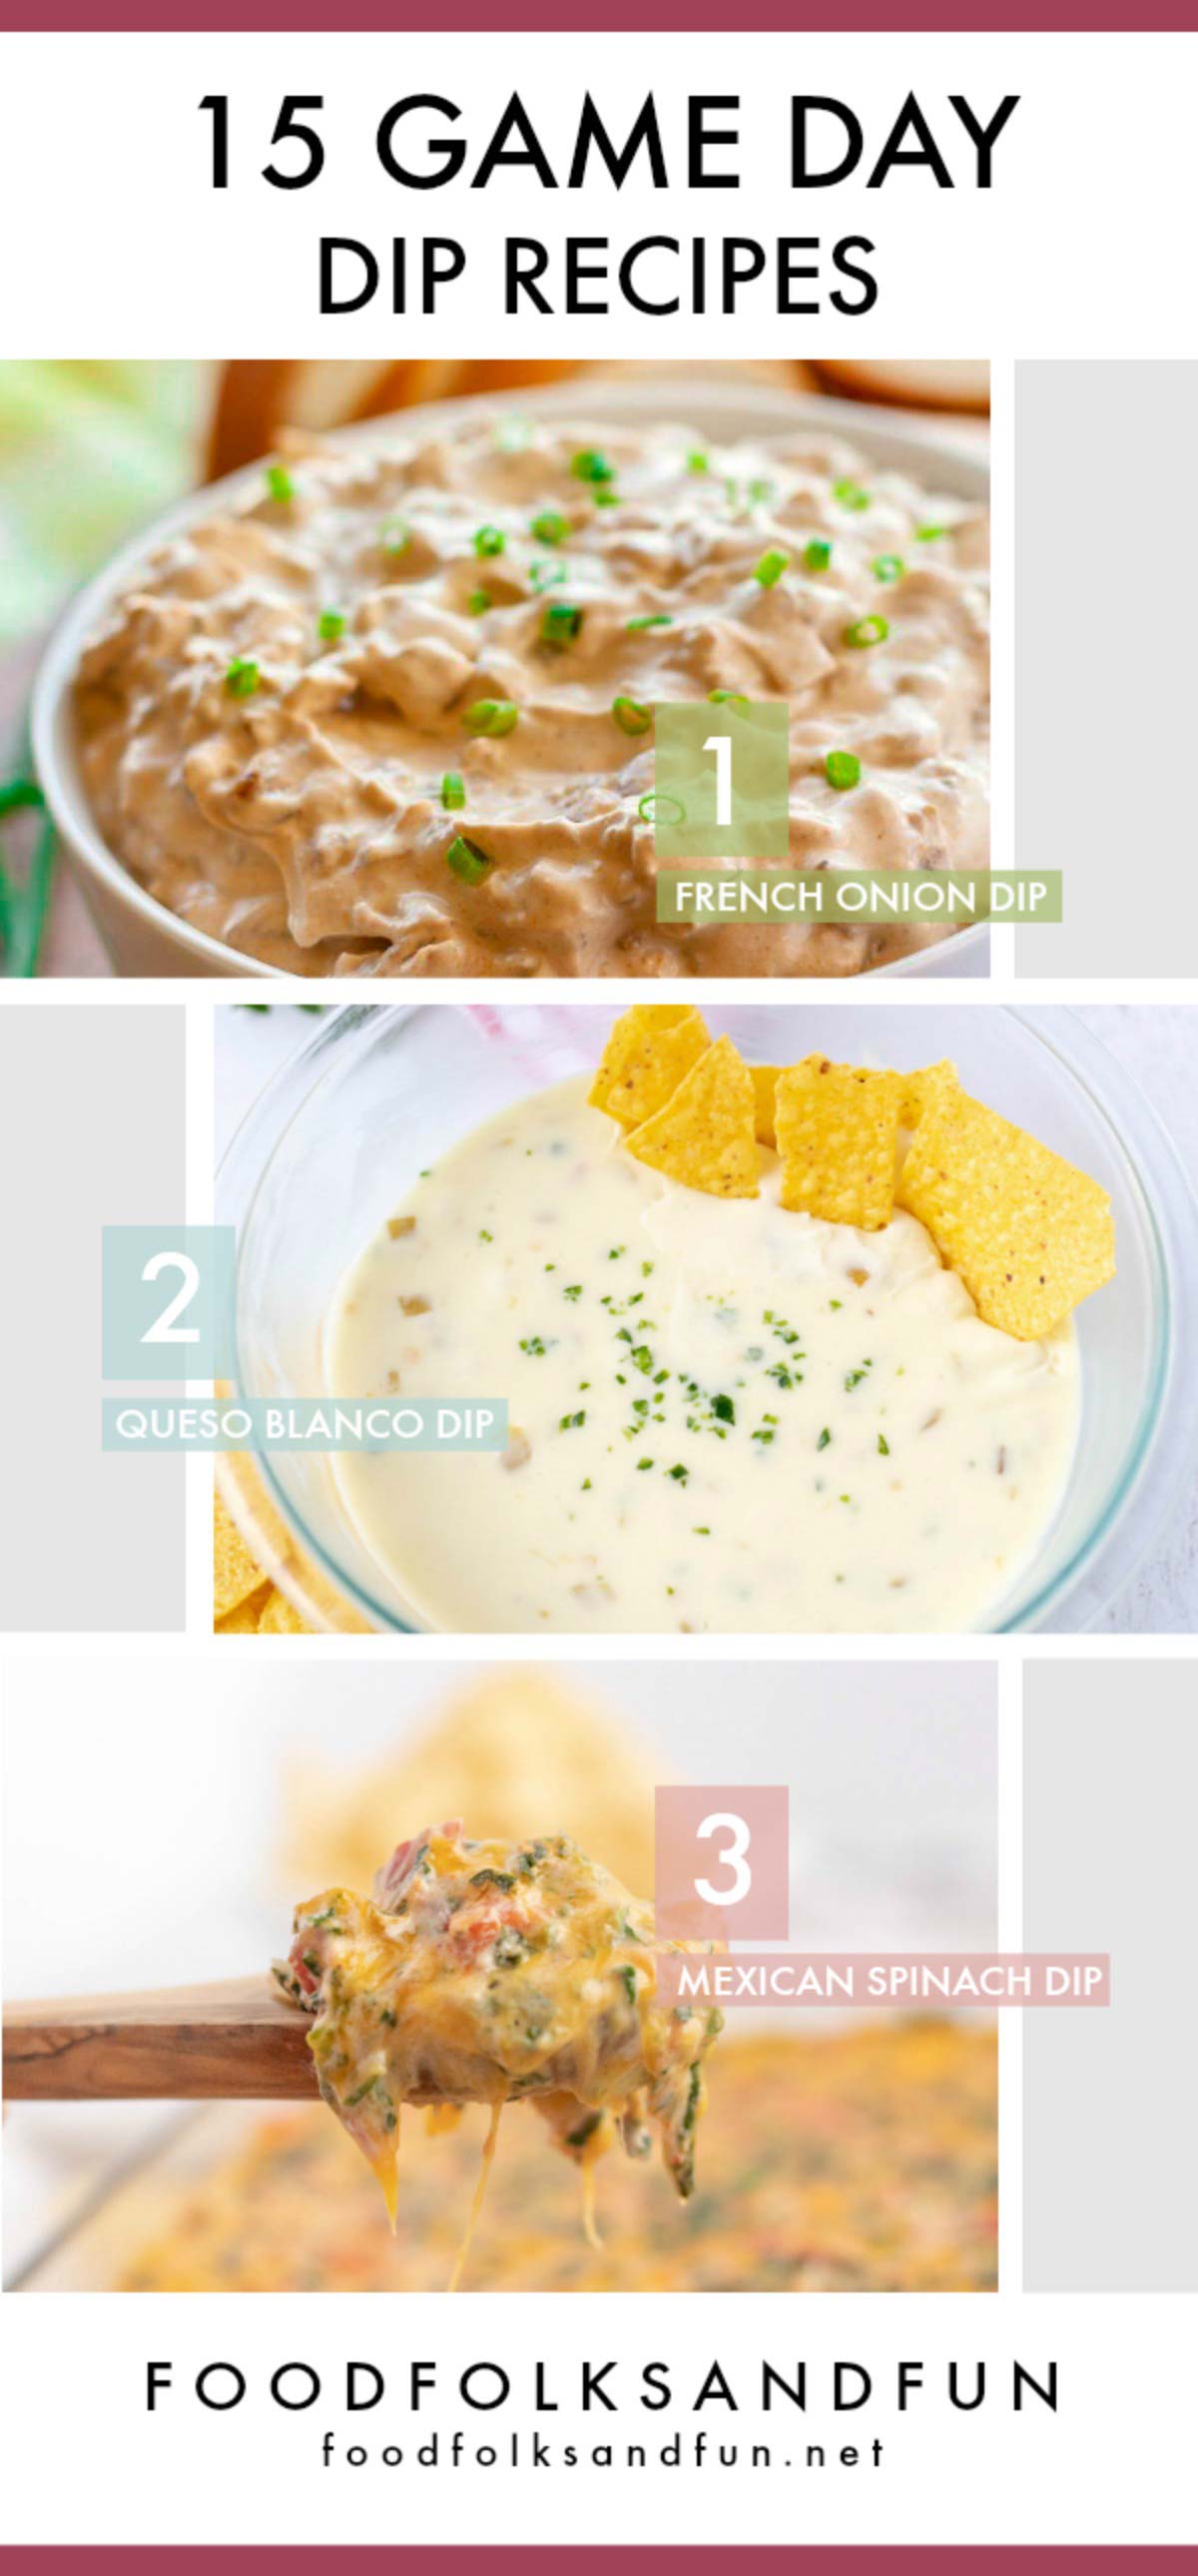 This dip recipes roundup has 15 dip recipes for game day, parties, and holidays that are sure to please! There are slow cooker dips, make-ahead dips, and more!  via @foodfolksandfun